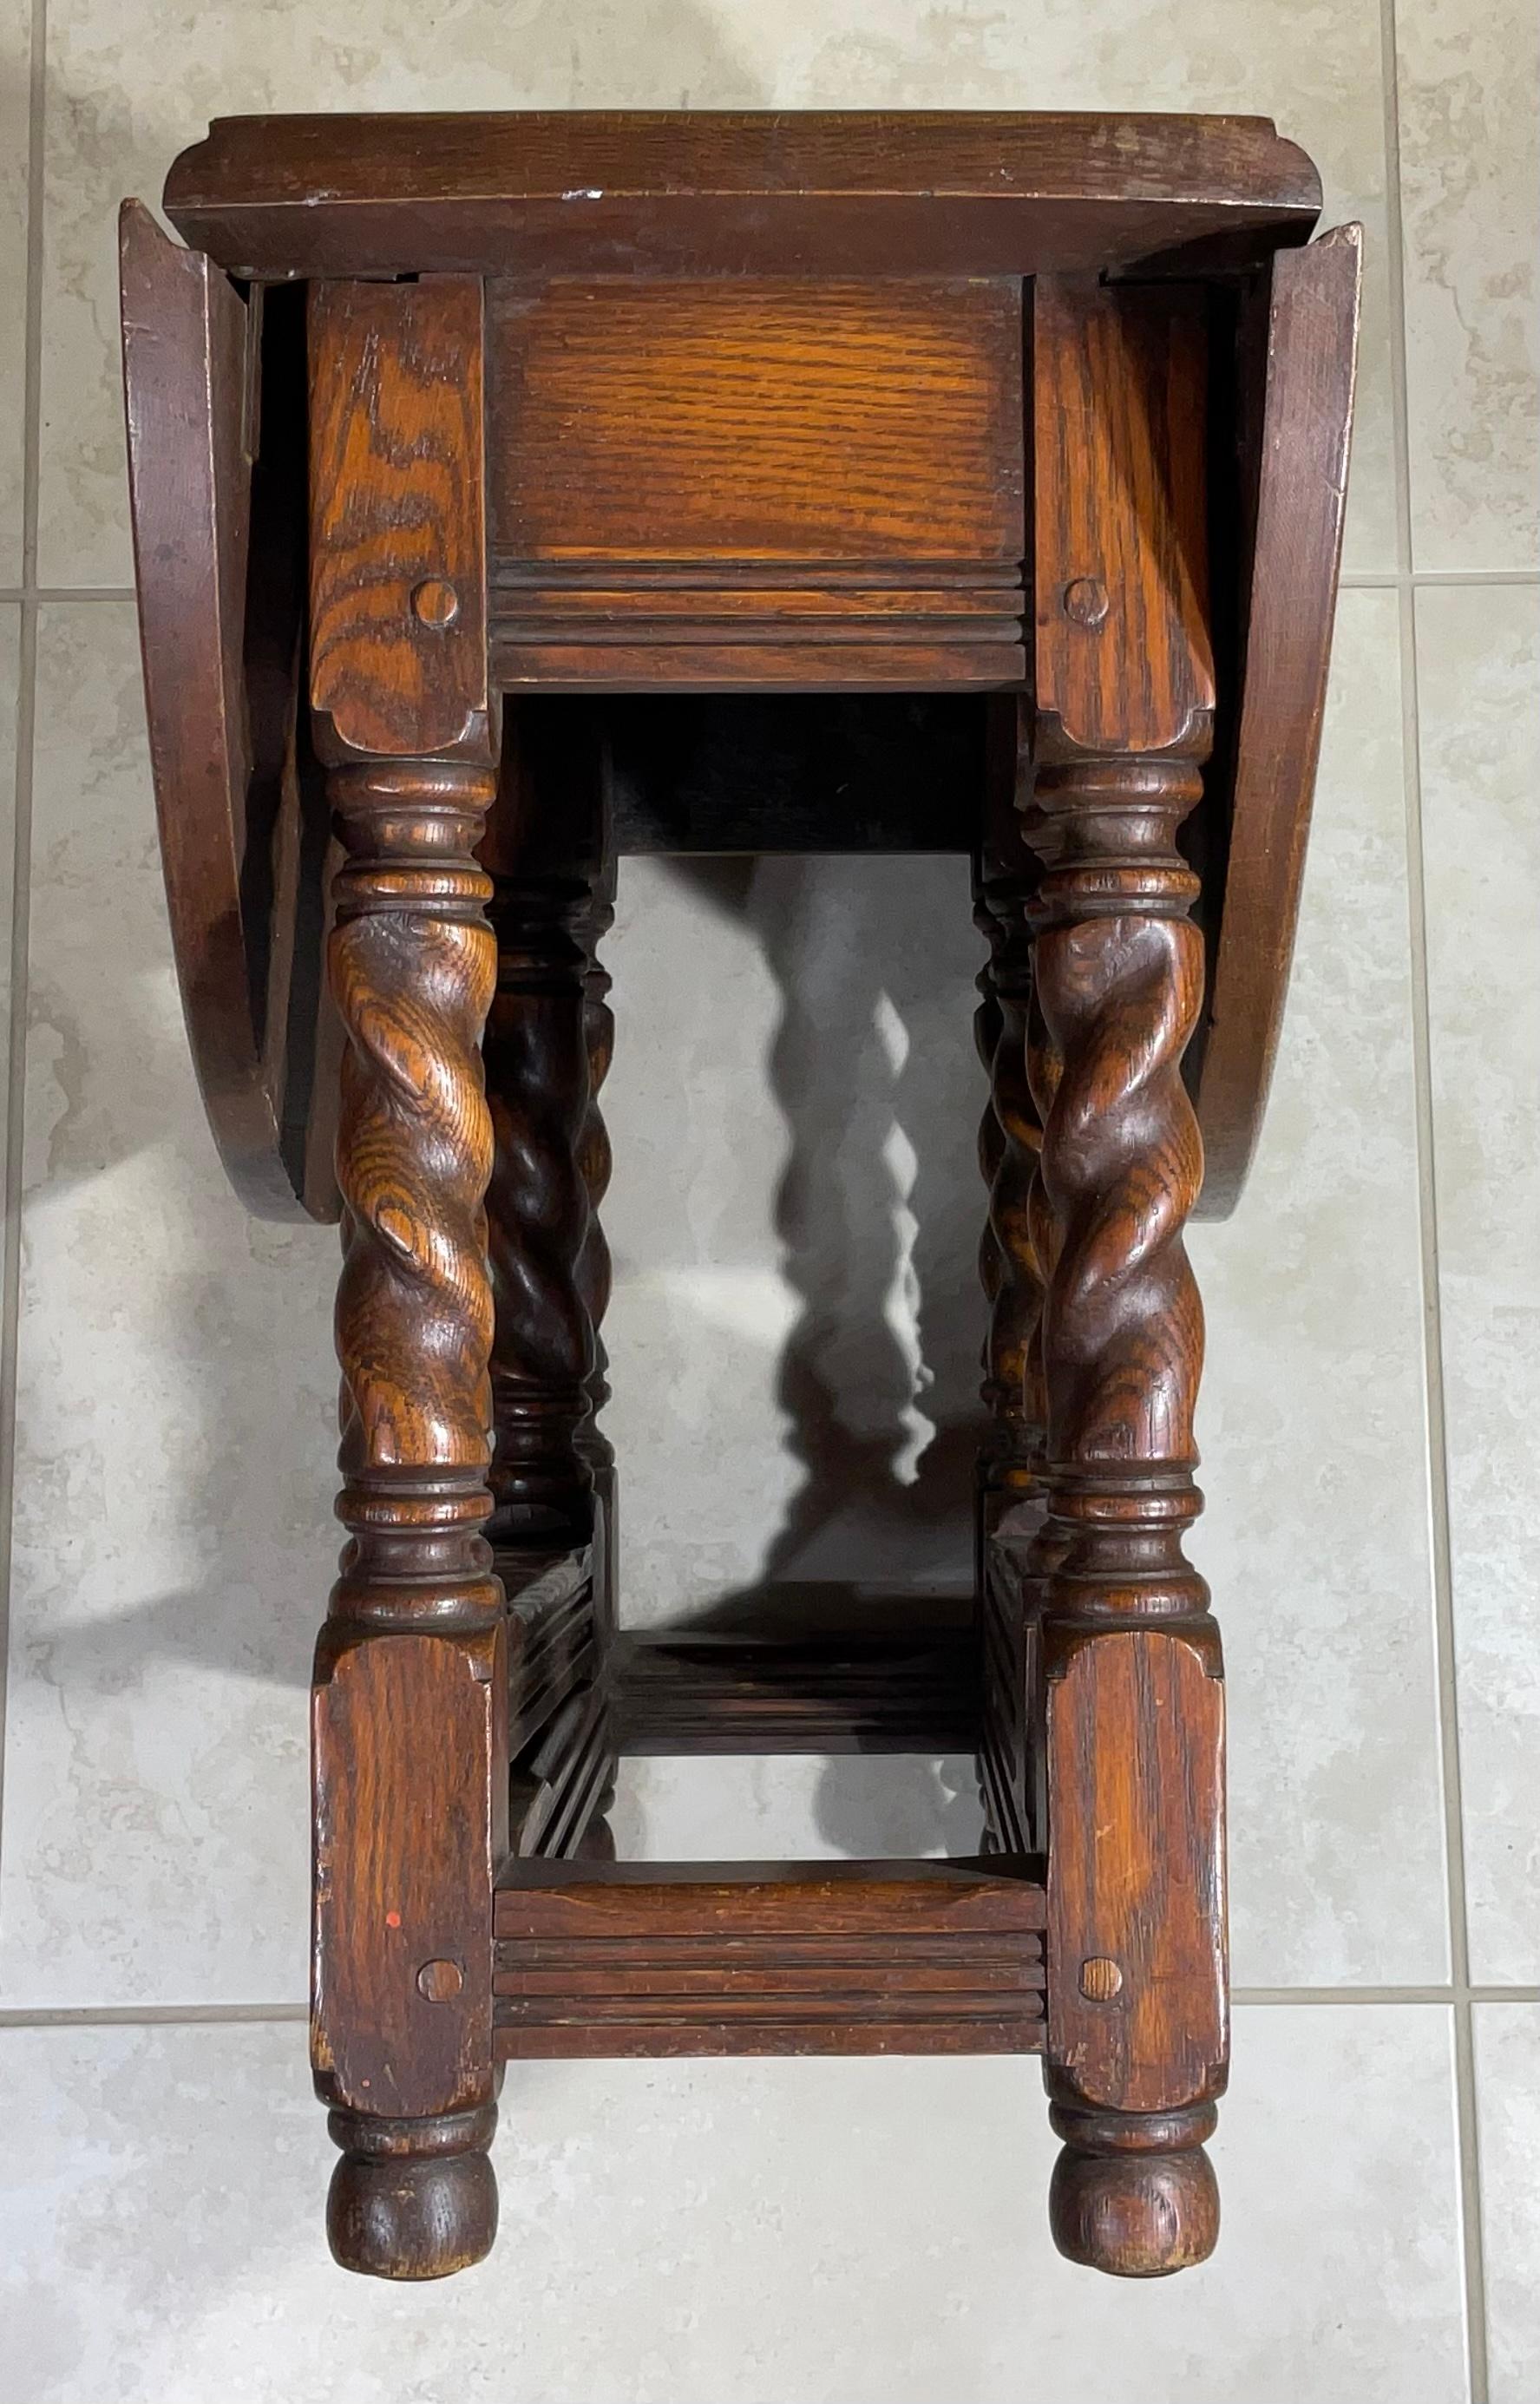 Petite Antique oak drop leaf side table ,barley twist gate leg a beautiful oak gate leg, drop leaf table . It is a very petite size, which is the smallest size drop leaf table available (and very hard-to-find)! And could use even as coffee table